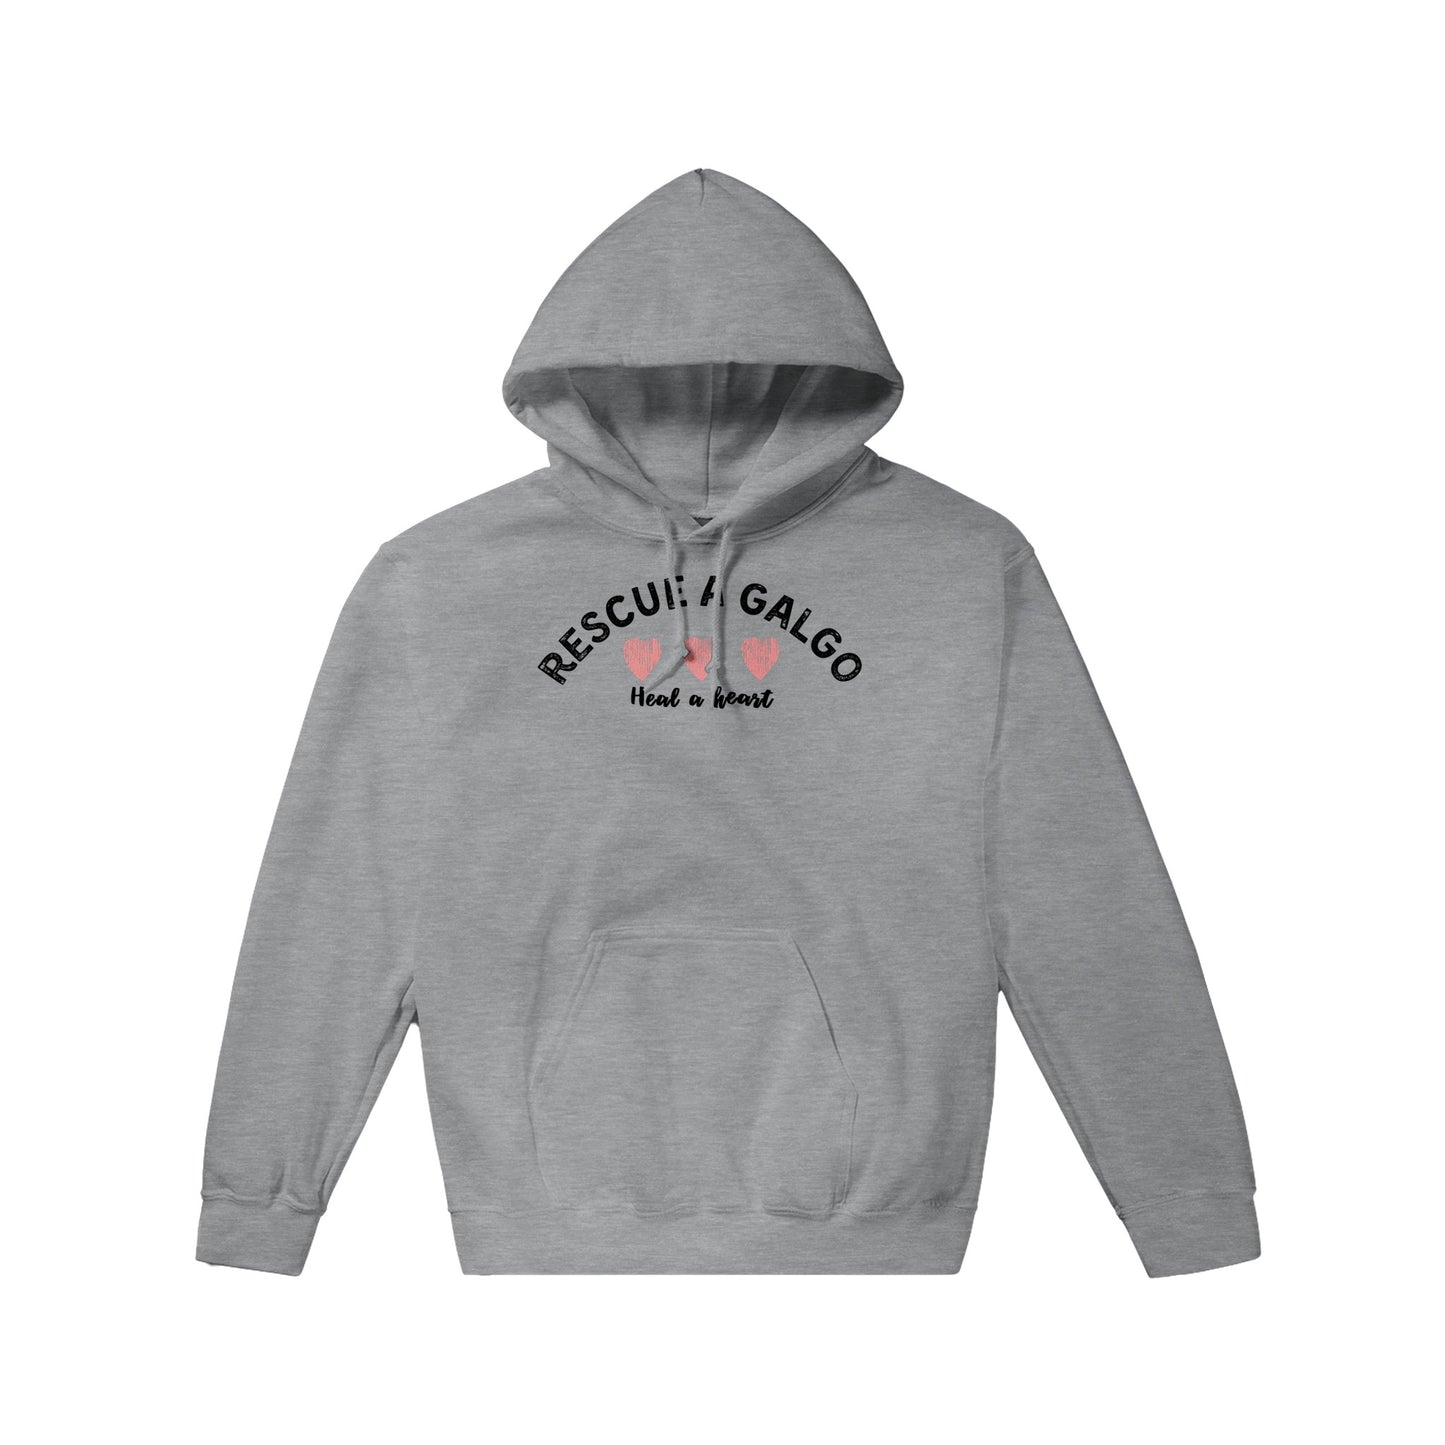 Heal a Heart Pullover Hoodie